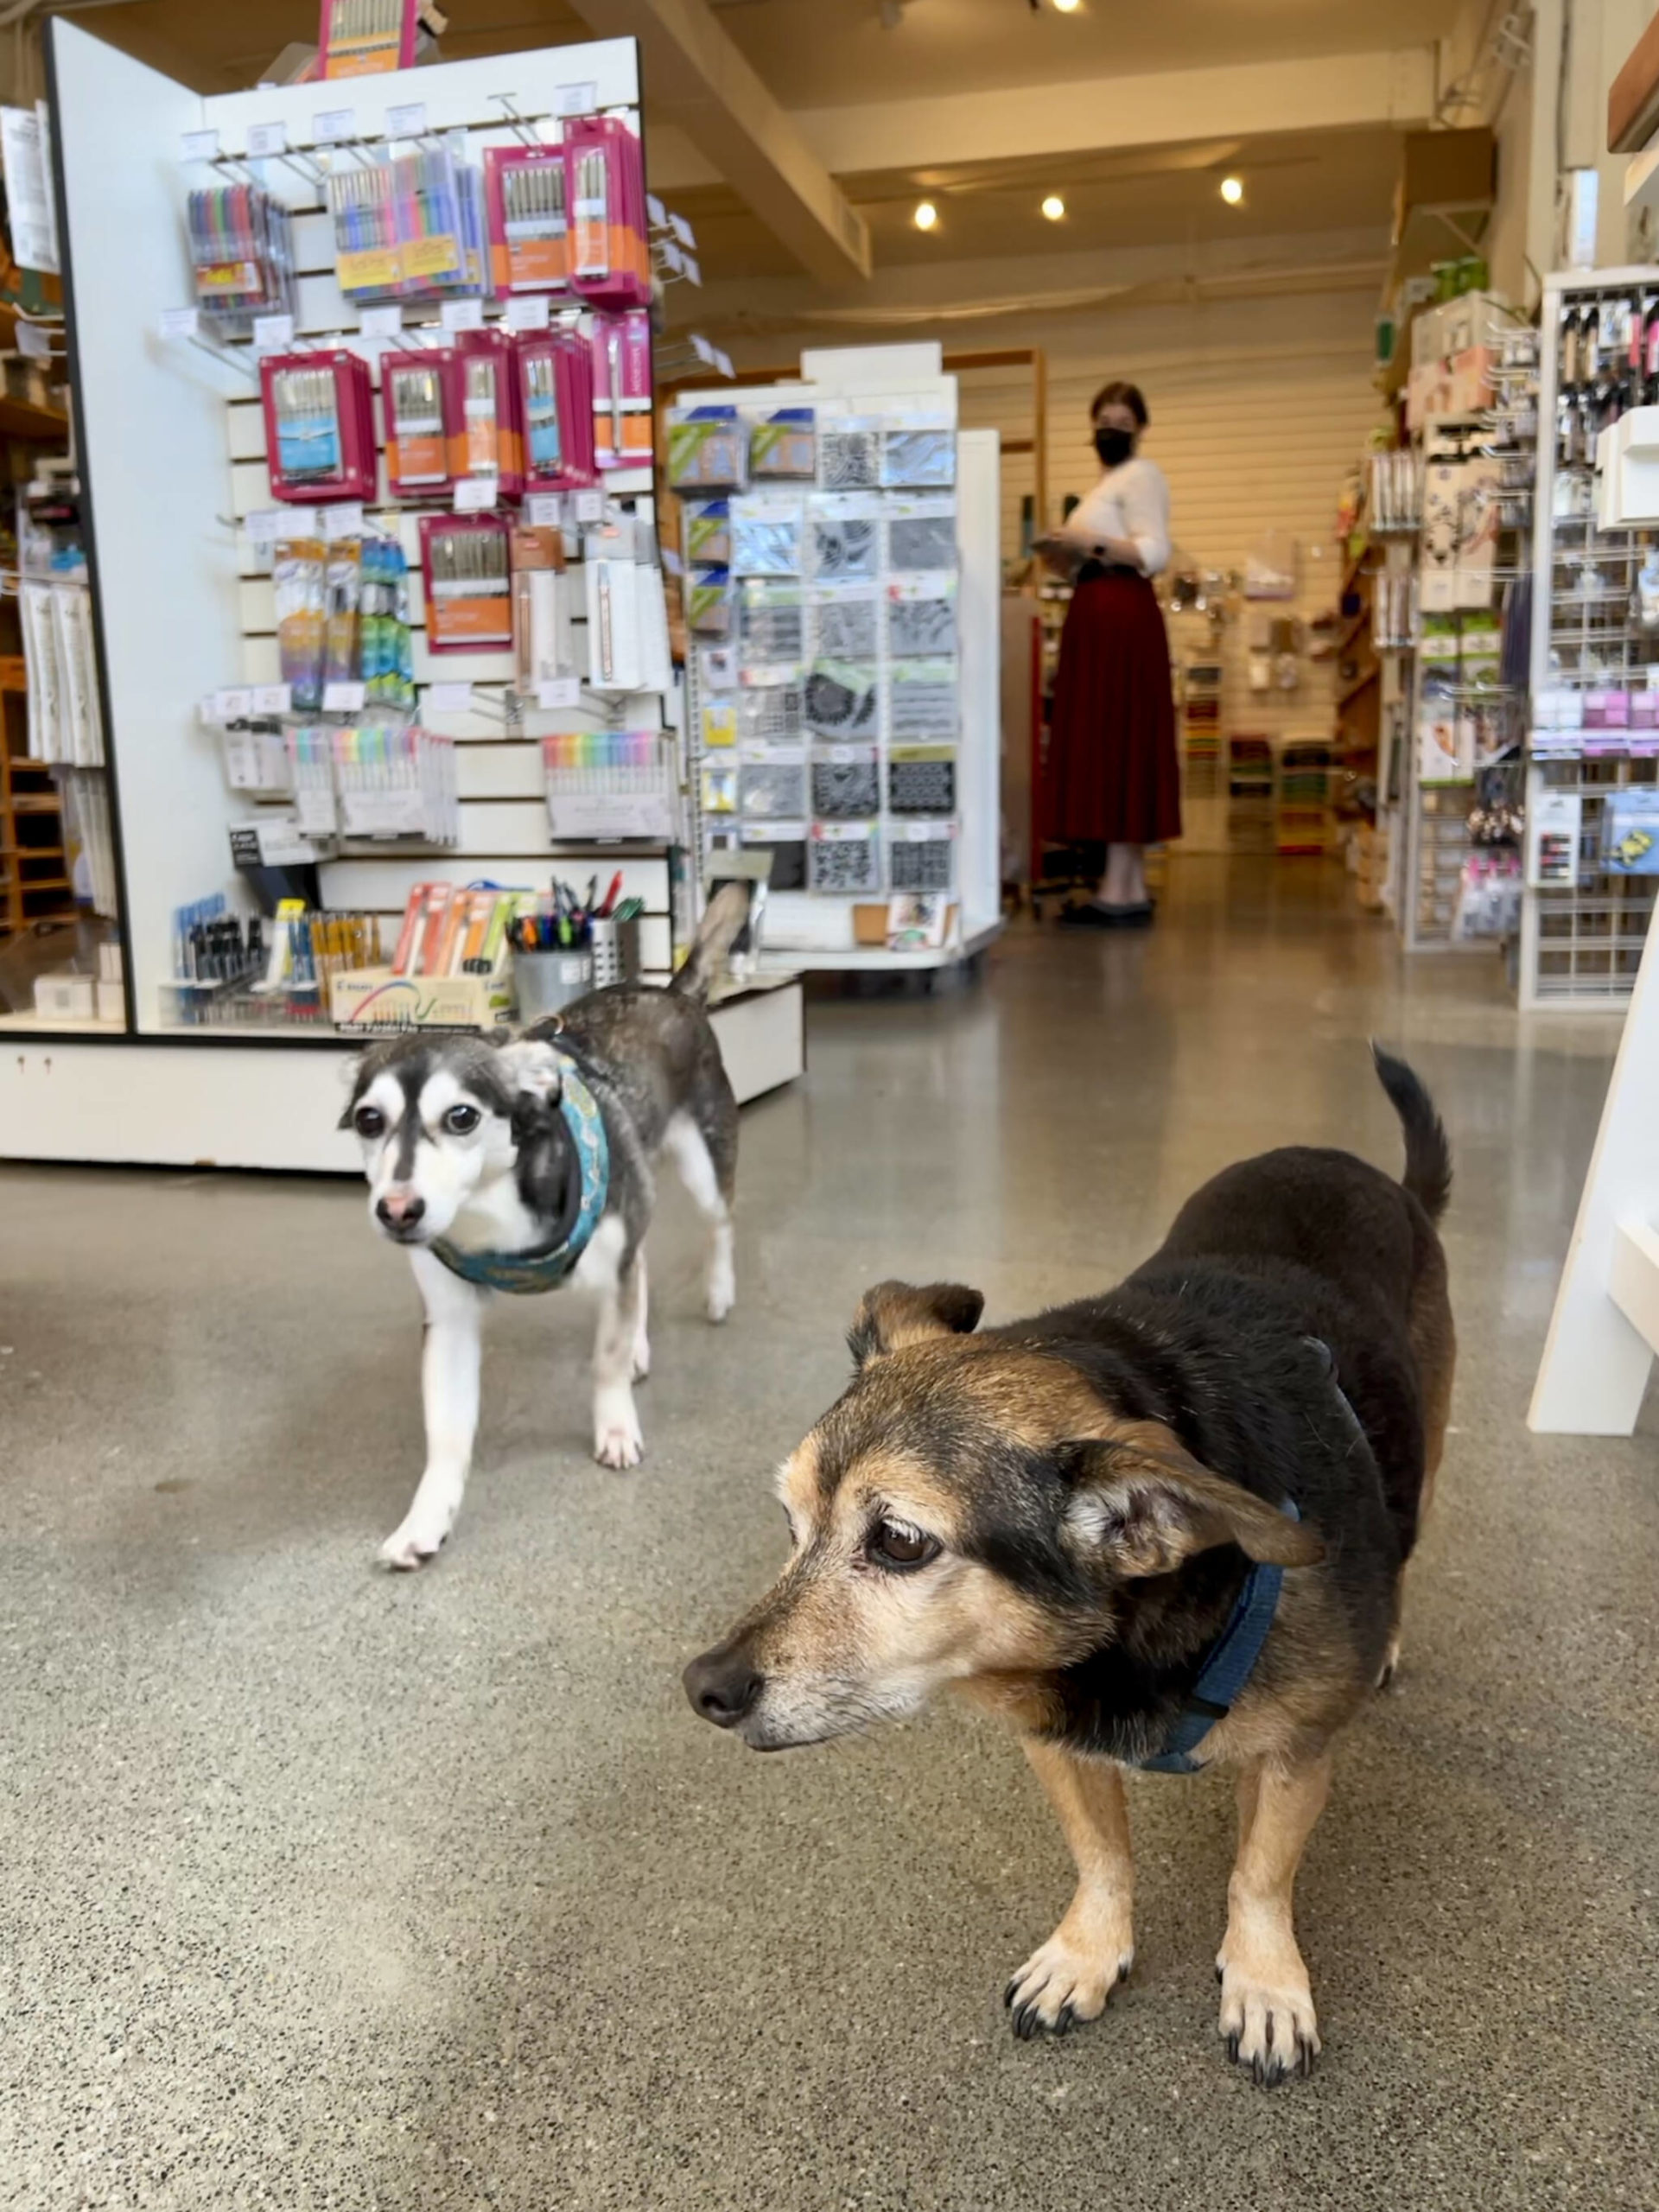 Rescued dogs, Gizmo and Udvar, welcome visitors to Little Island Crafts as owner Rachel Ringdahl looks on. Nancy Treder/Bainbridge Island Review Photos